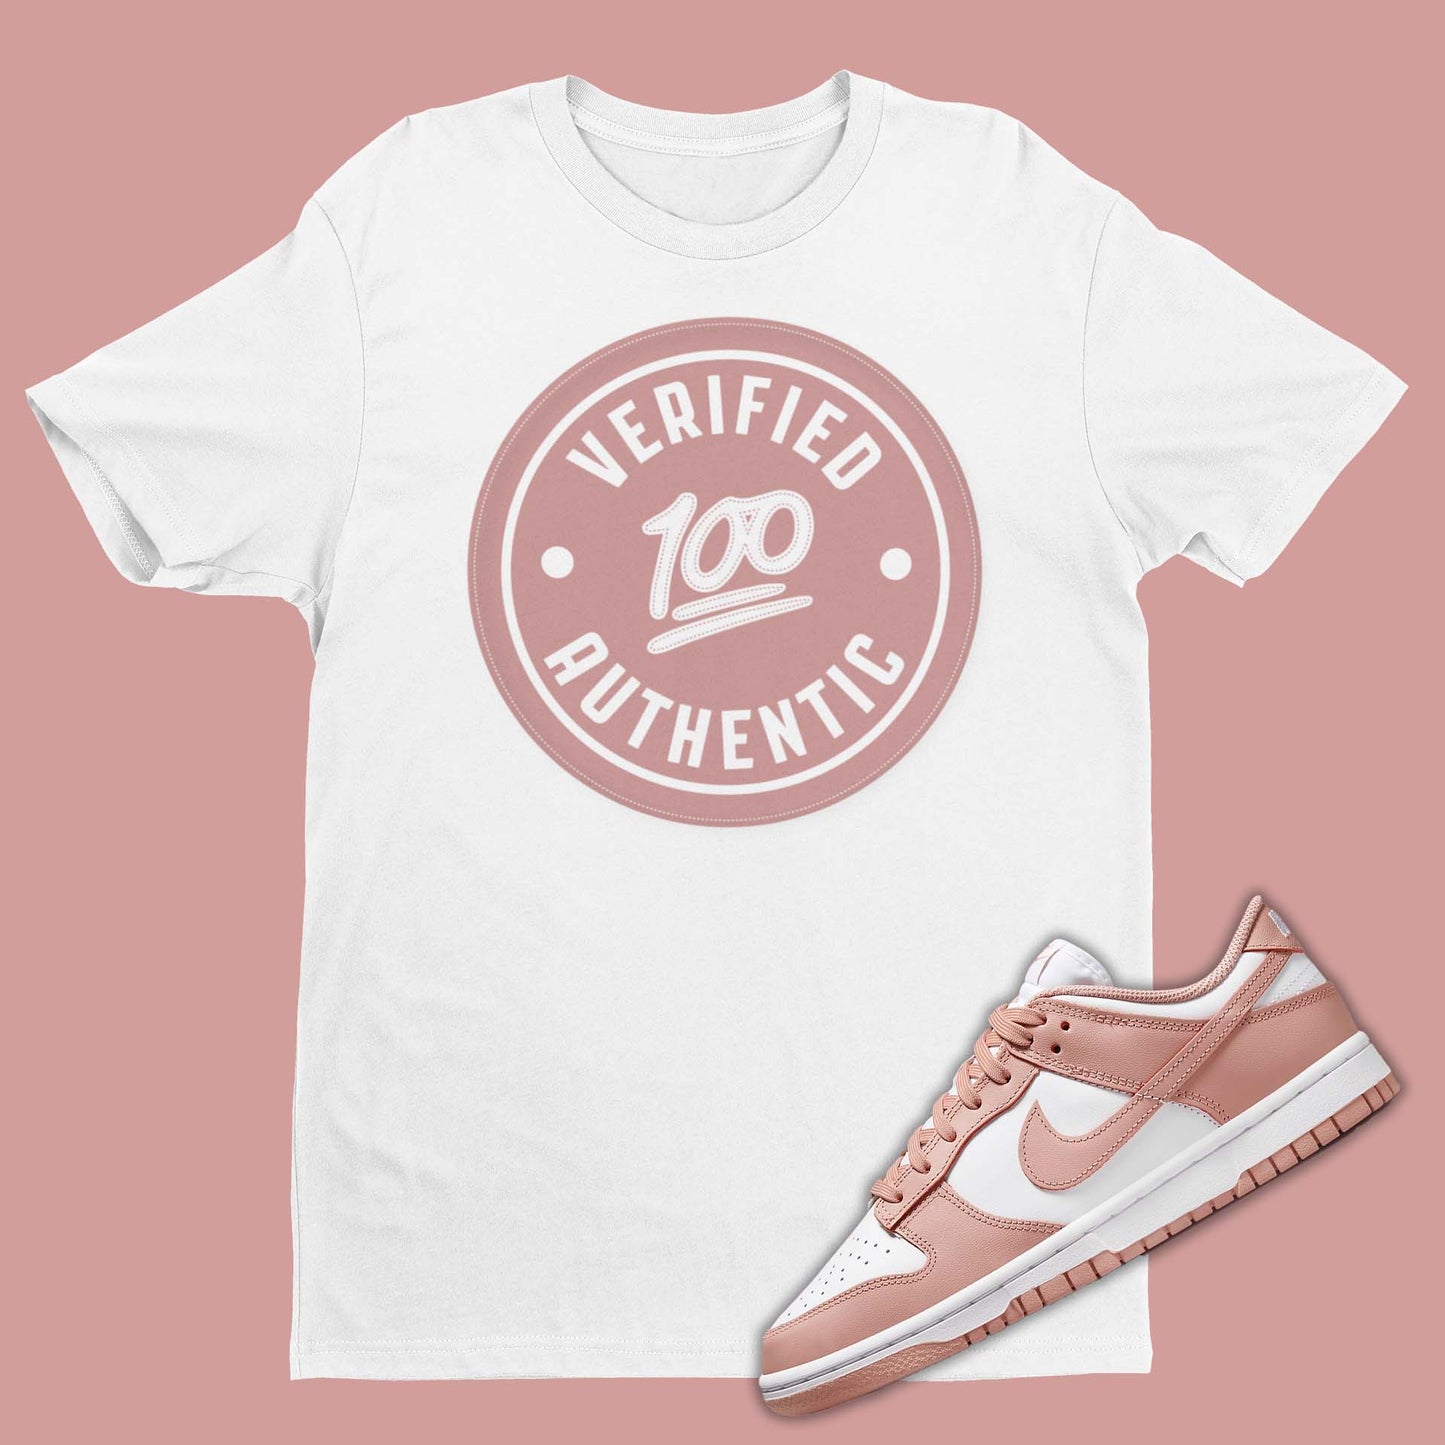 The perfect shirt to match your Nike Dunk Rose Whisper sneakers! Our Match Rose Whisper Dunks t-shirt is made to compliment your kicks. Bring your sneakers to the next level with this Dunk Rose Whisper shirt. Match and feel trendy with this graphic tee!